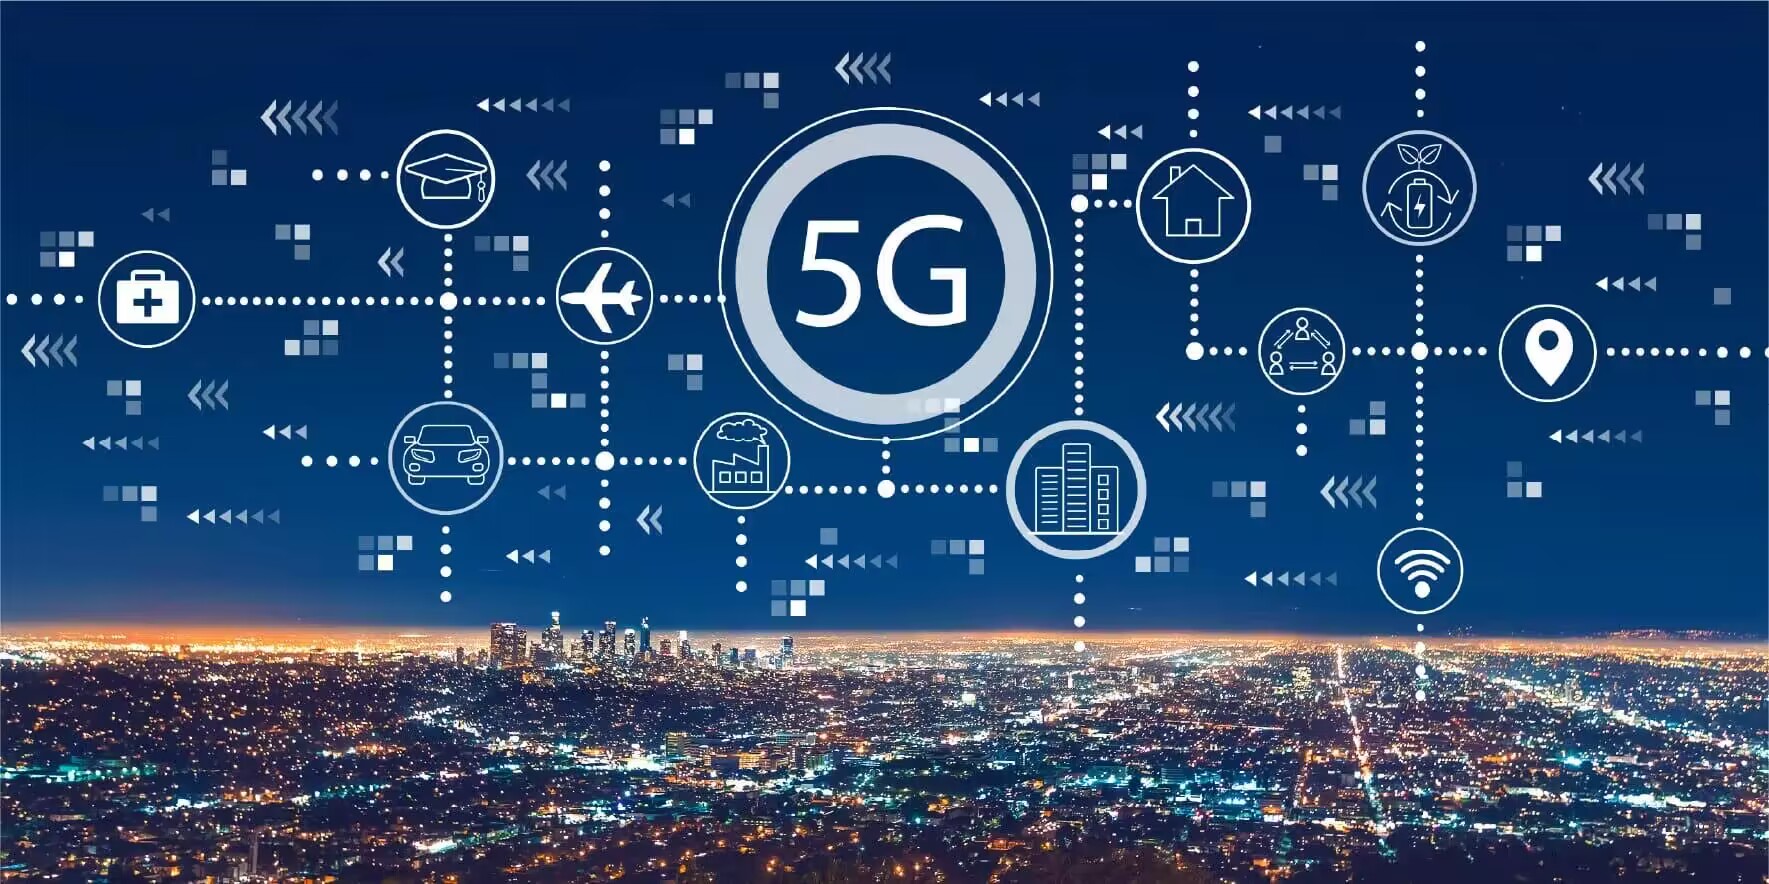 The deployment of 5G networks and the role of FTTH in supporting the infrastructure needed for 5G (2)